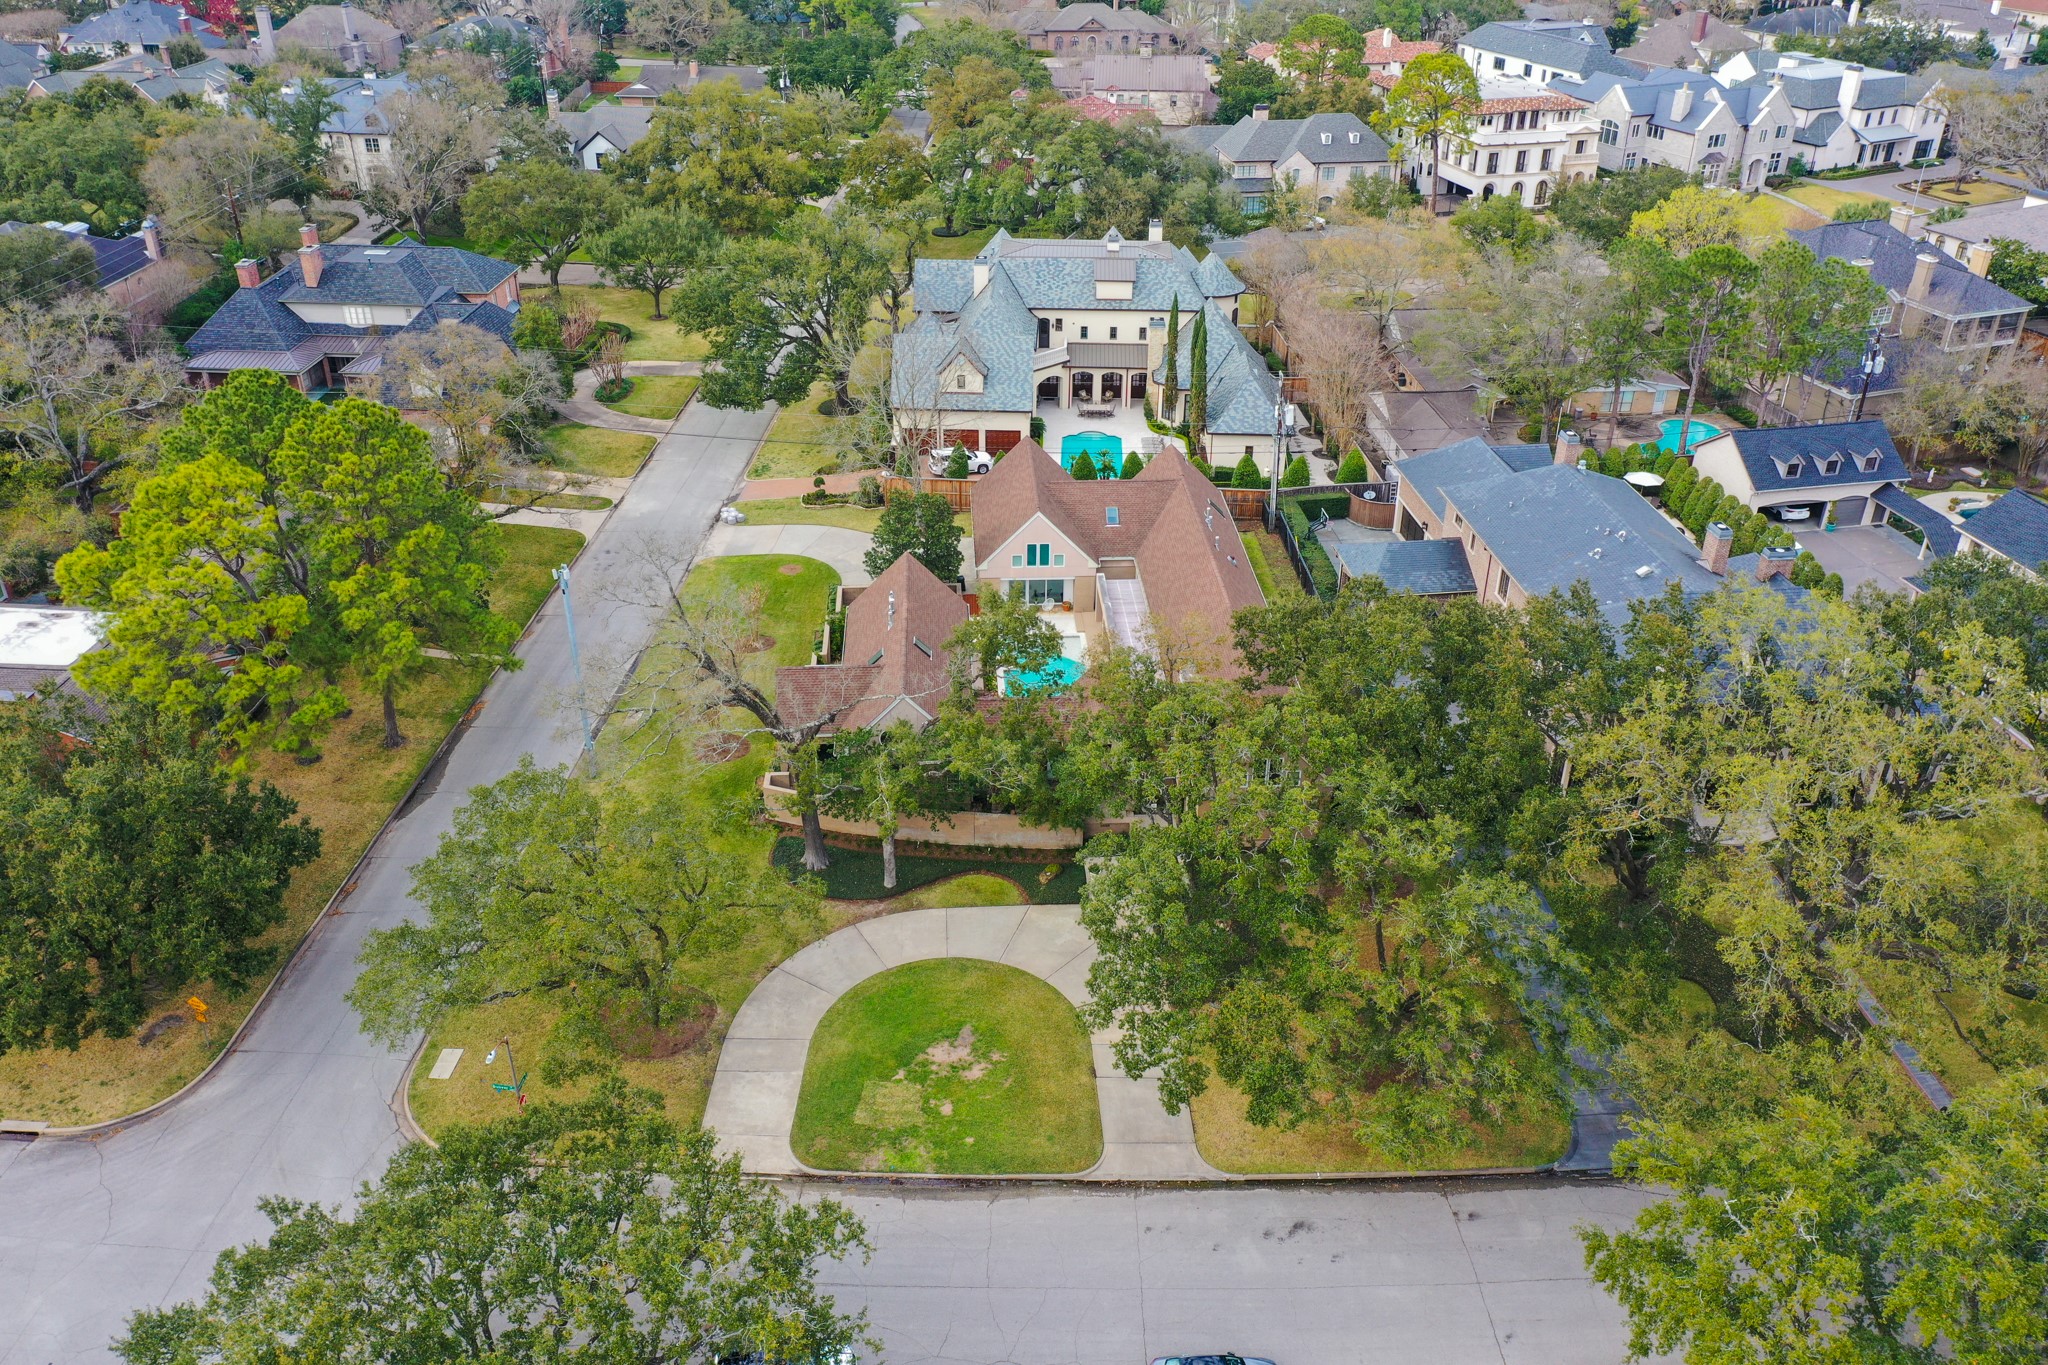 Aerial view of 5588 Doliver on the corner of Sherbrooke Road and Doliver Drive.